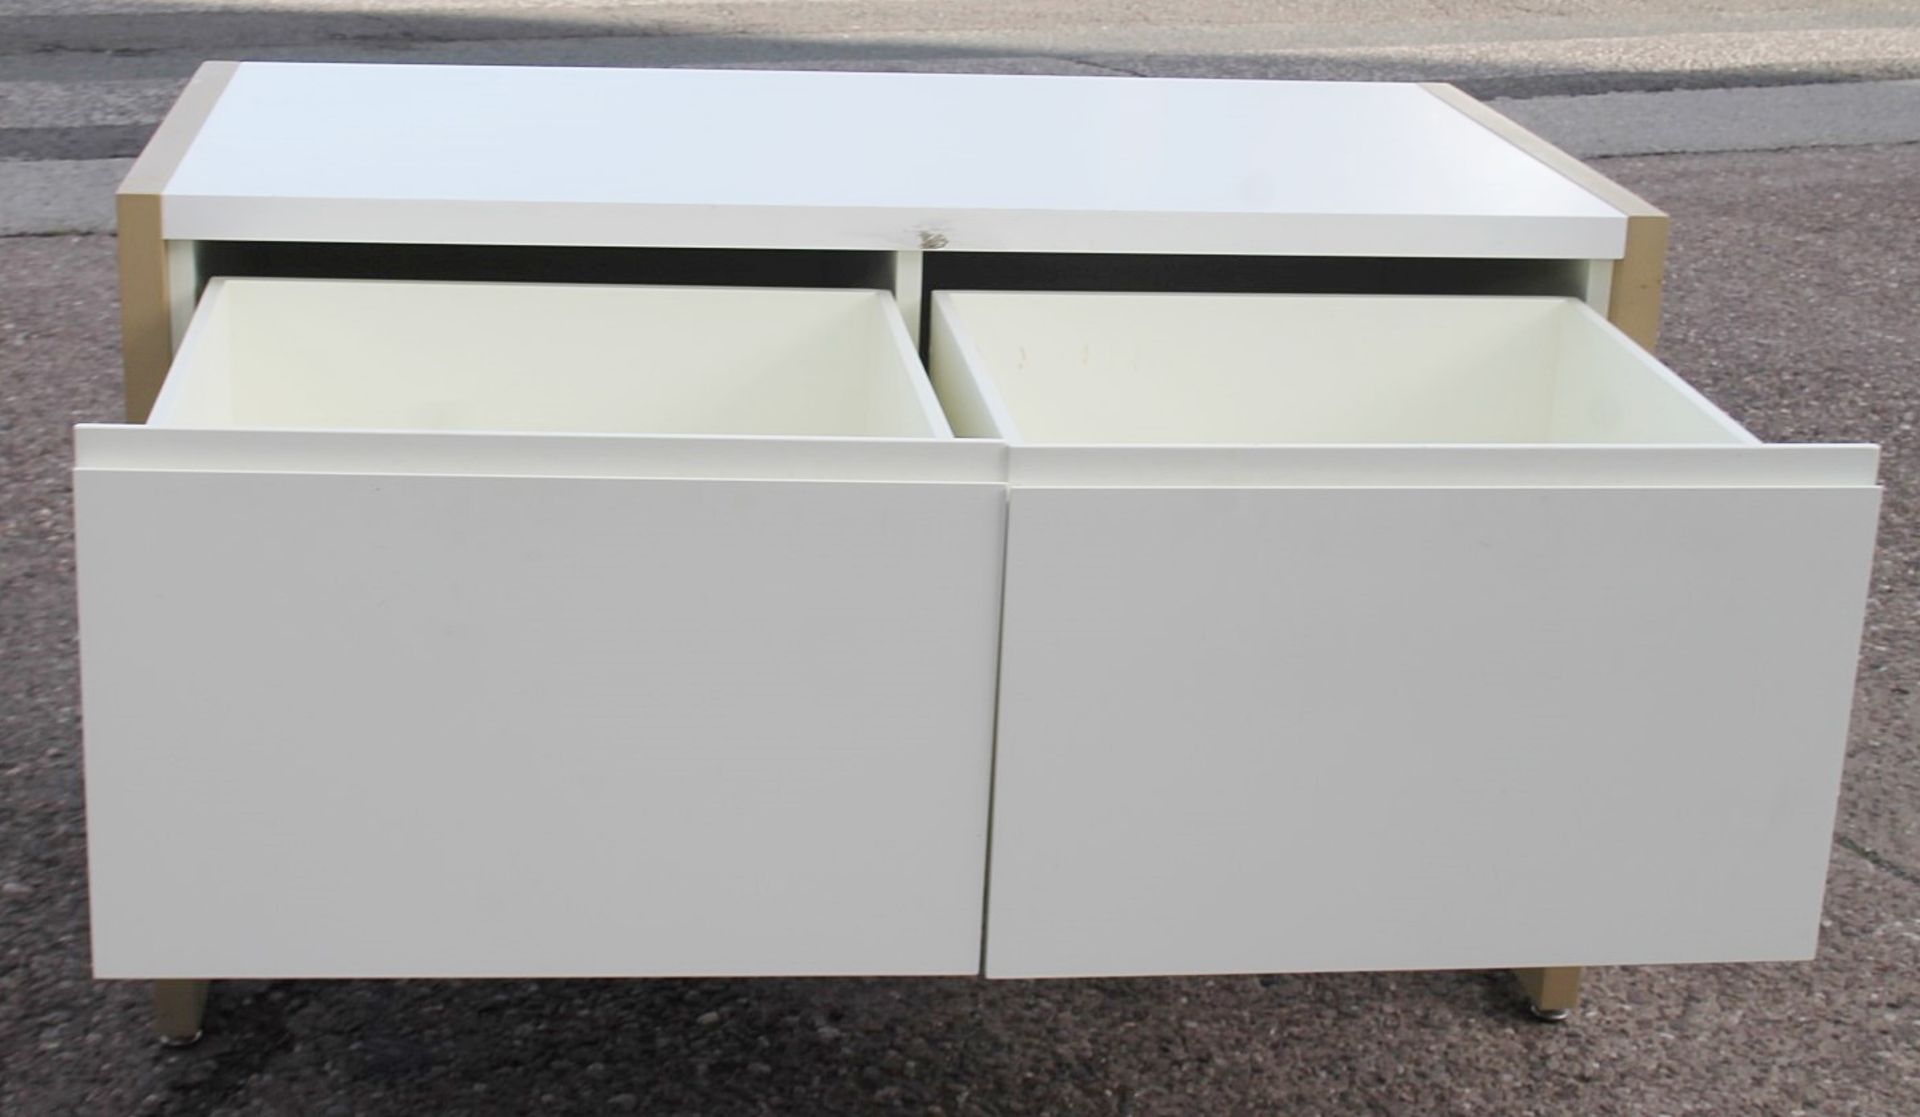 1 x Large 2-Drawer Retail Fixture In White And Gold - Recently Removed From A World-renowned - Image 2 of 2